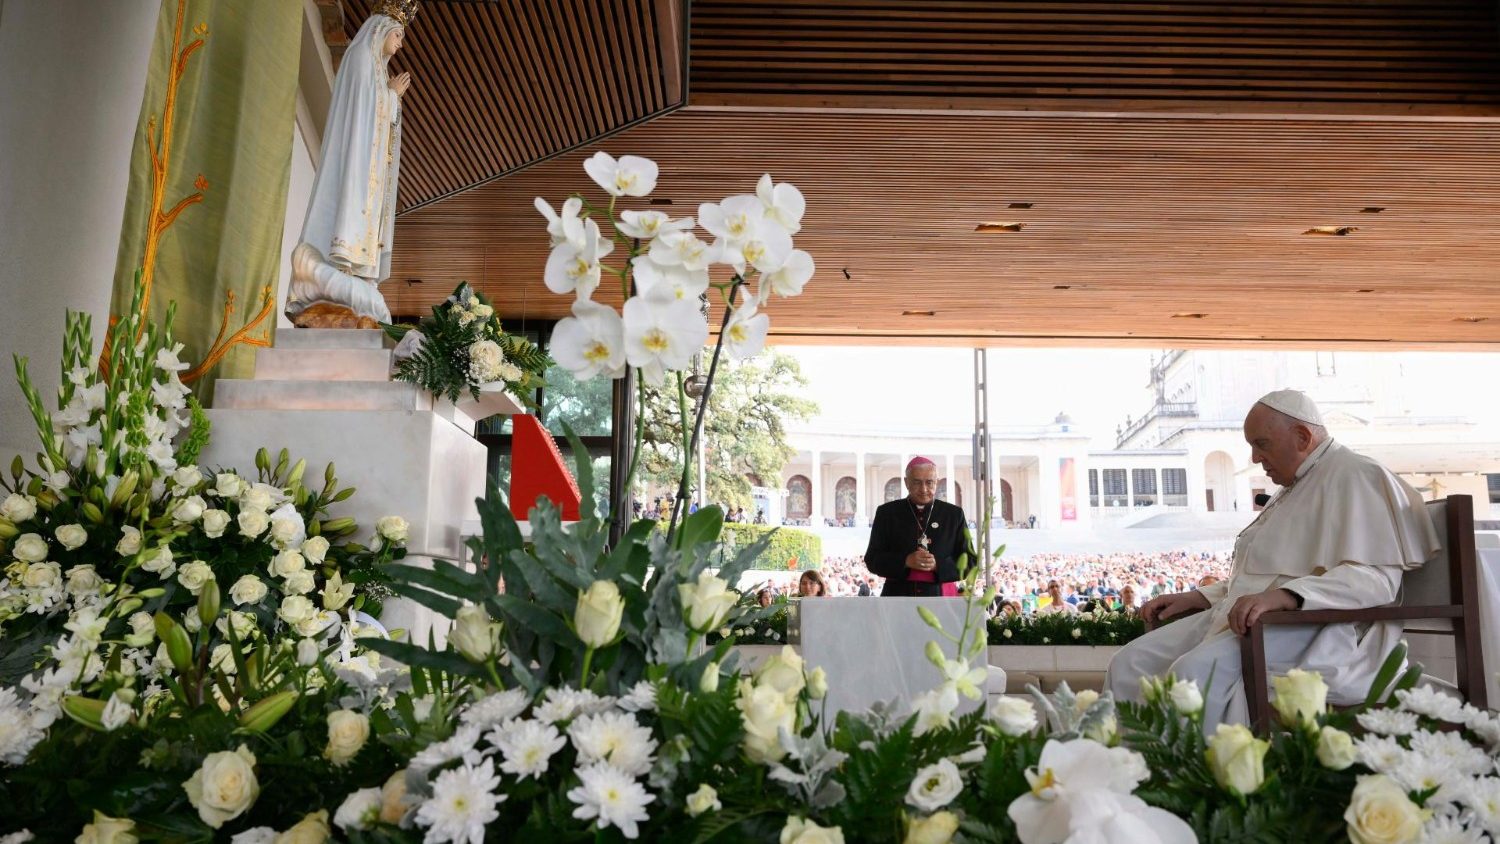 Pope Francis prays for peace ‘with sorrow’ in Fatima - Vatican News